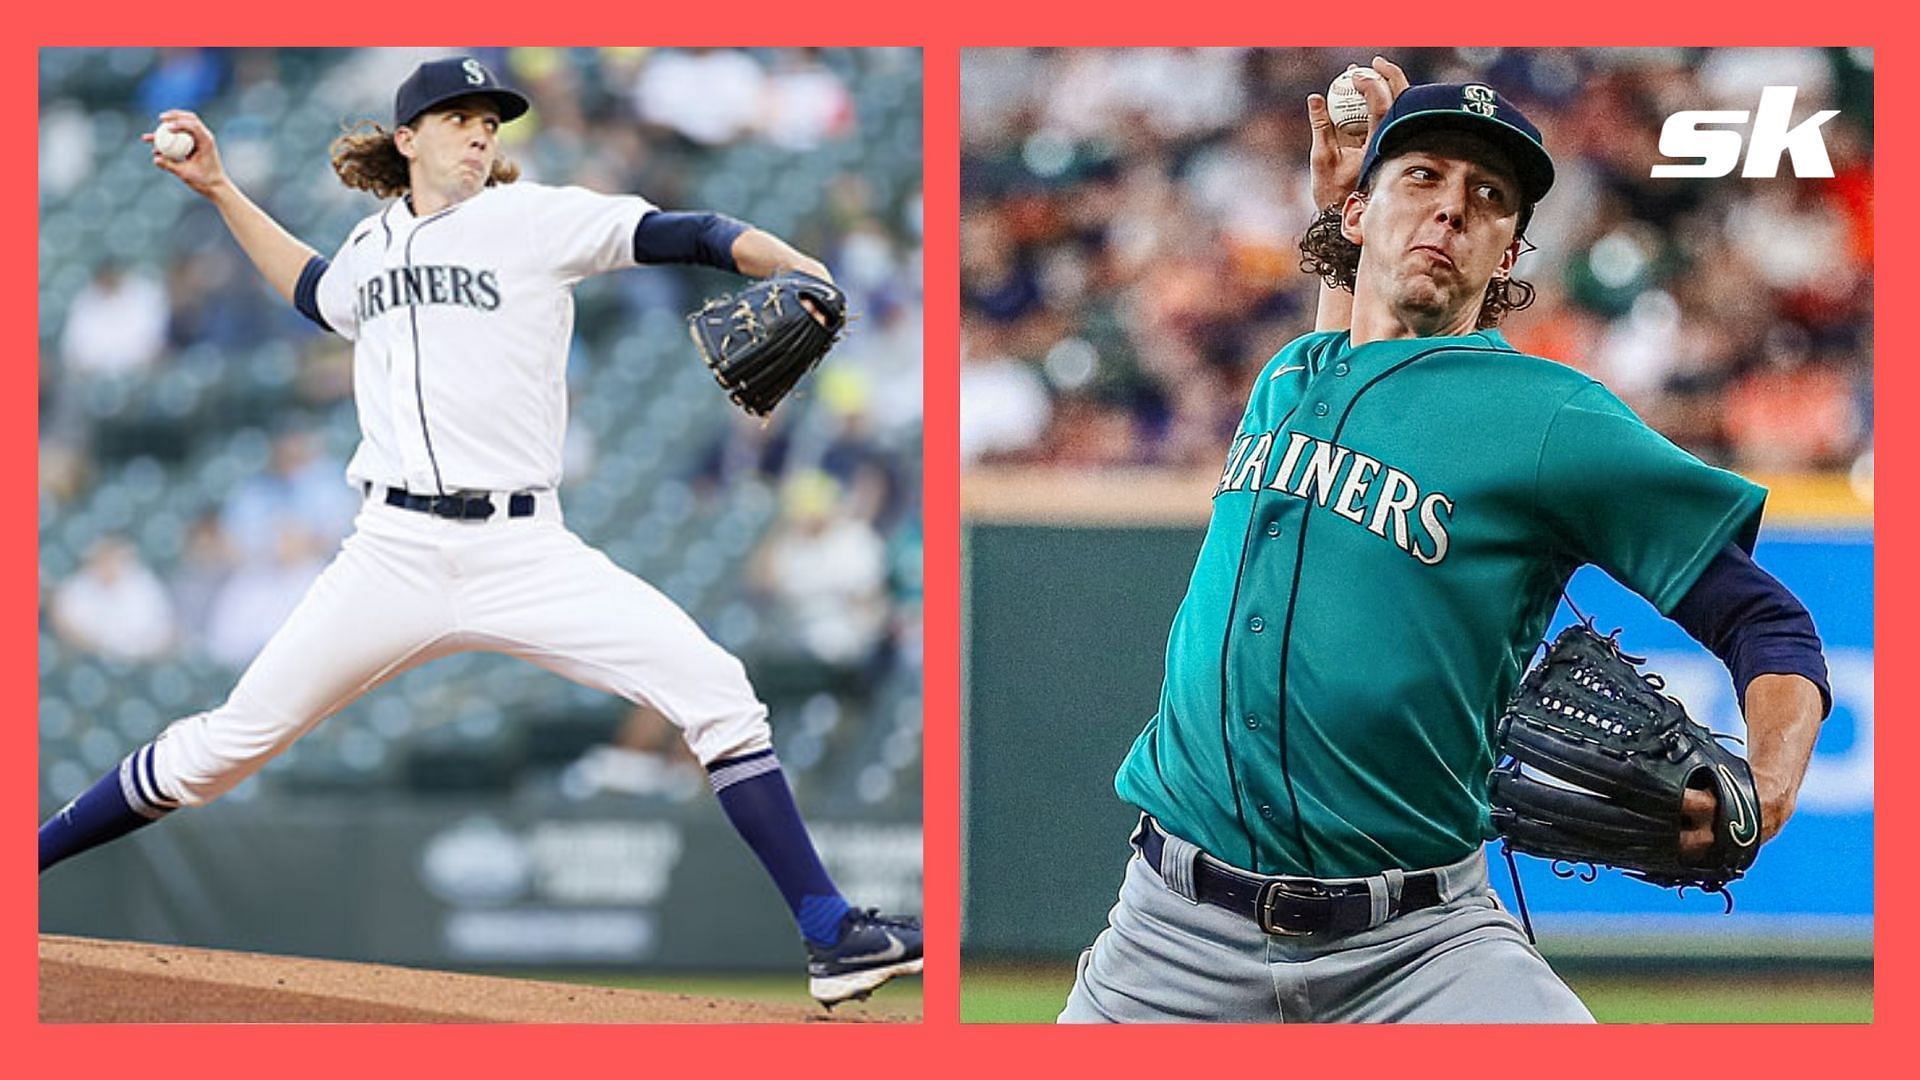 Seattle Mariners' young core is here to lead them now and in the